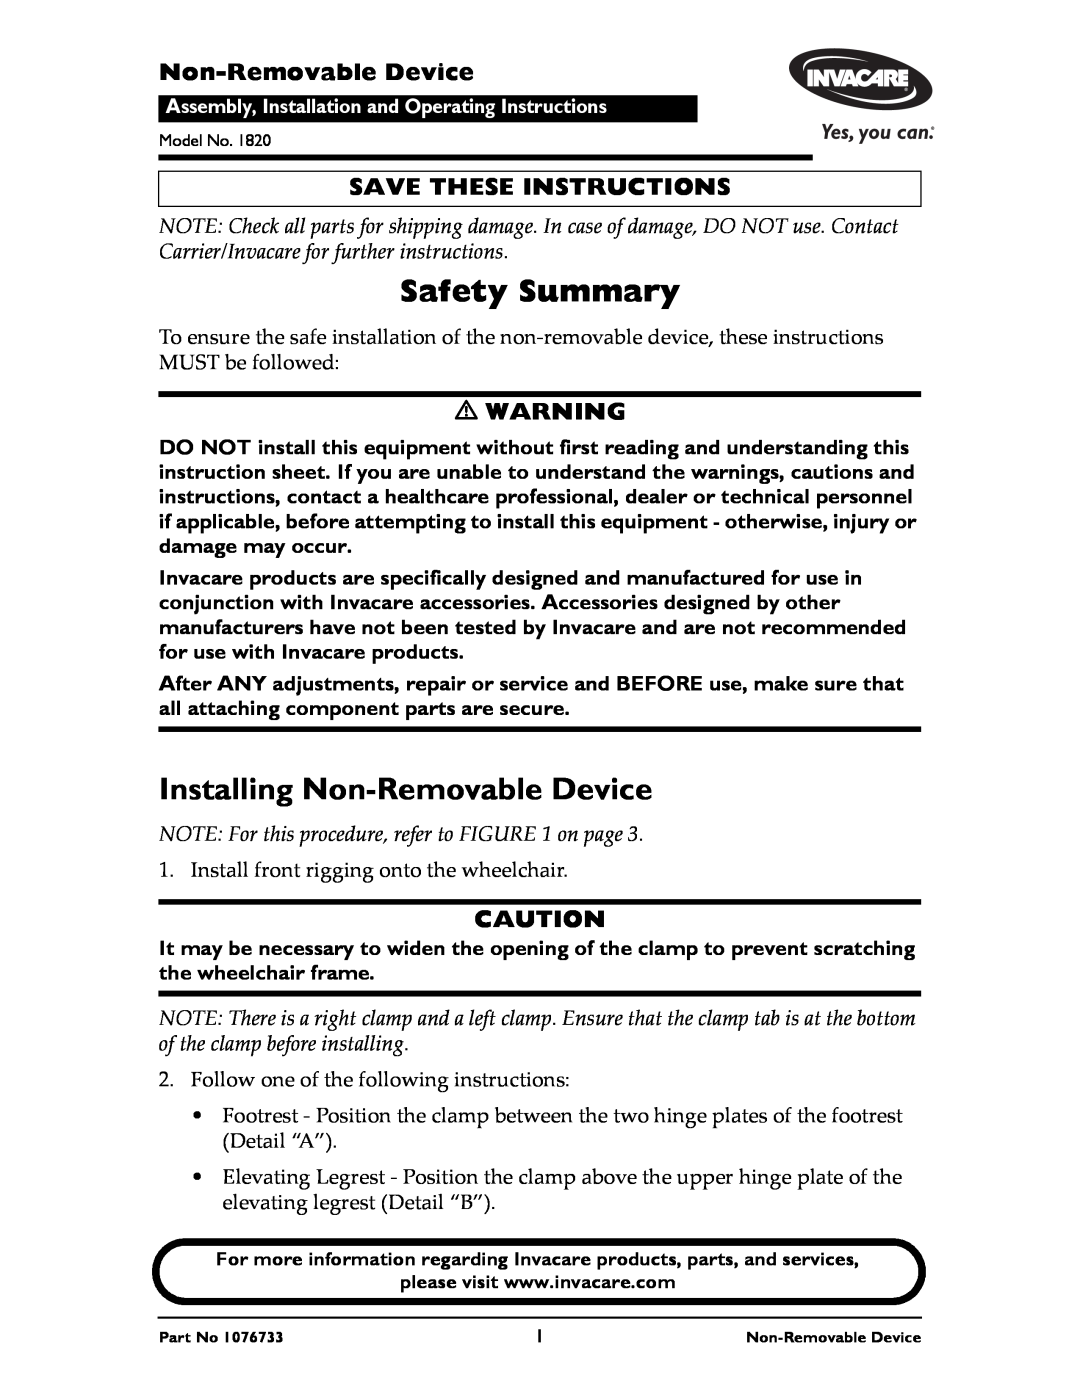 Invacare 1820 instruction sheet Safety Summary, Installing Non-Removable Device, Save These Instructions 